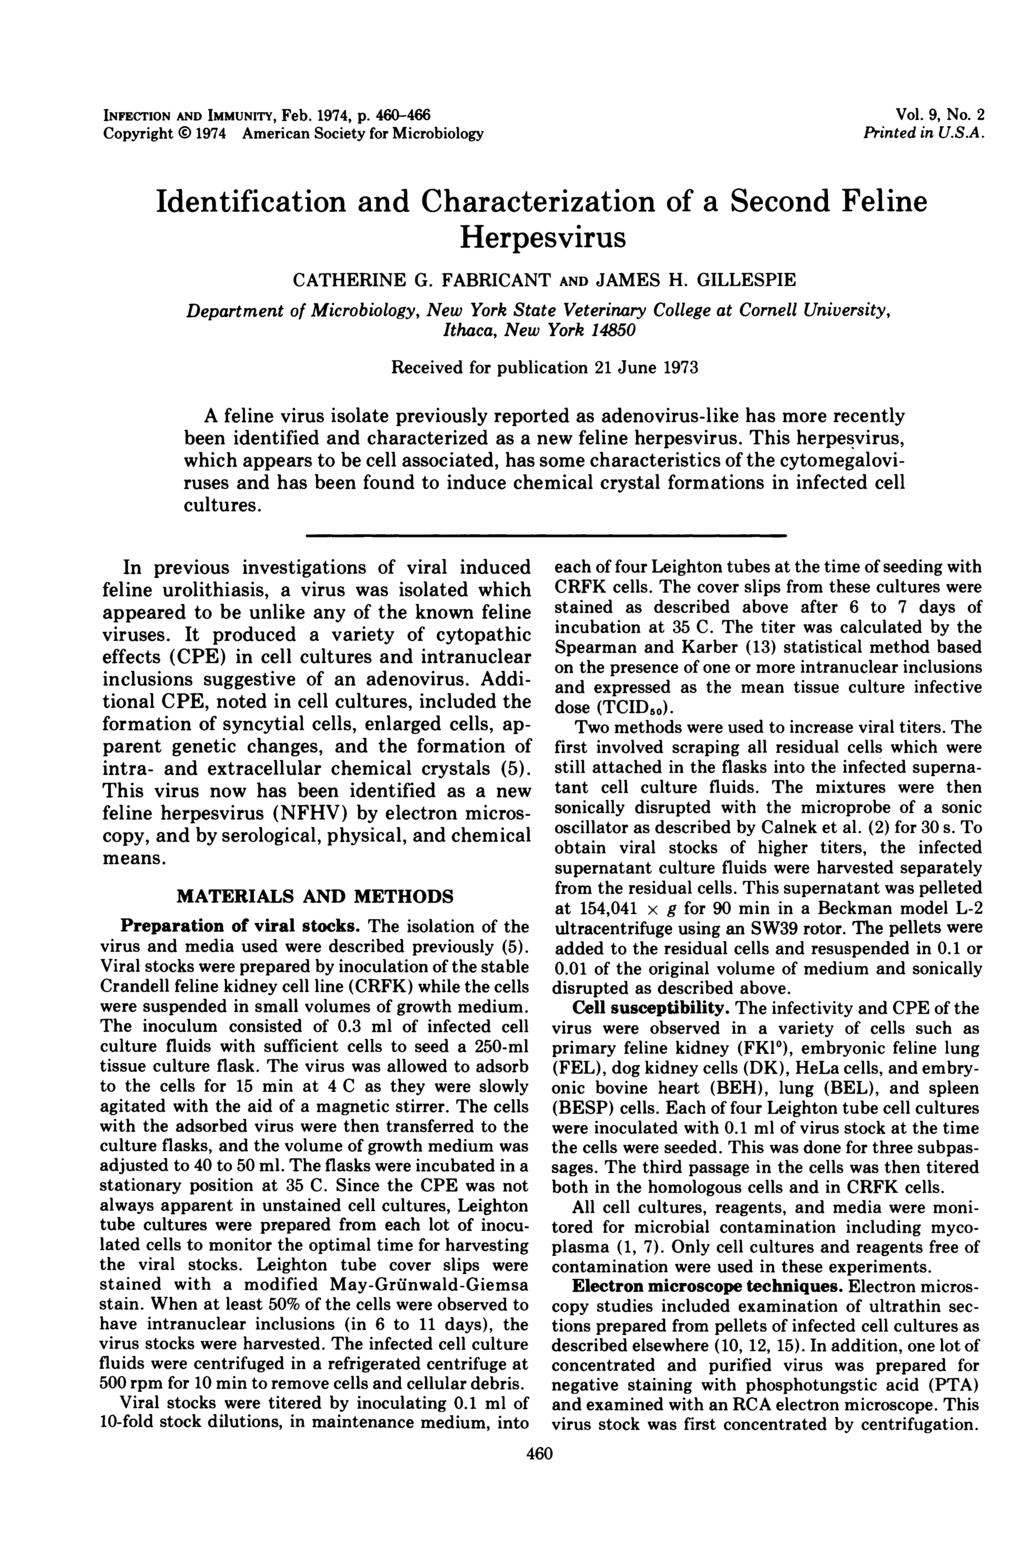 INFECTION AND IMMUNITY, Feb. 1974, p. 460-466 Copyright 0 1974 American Society for Microbiology Vol. 9, No. 2 Printed in U.S.A. Identification and Characterization of a Second Feline Herpesvirus CATHERINE G.